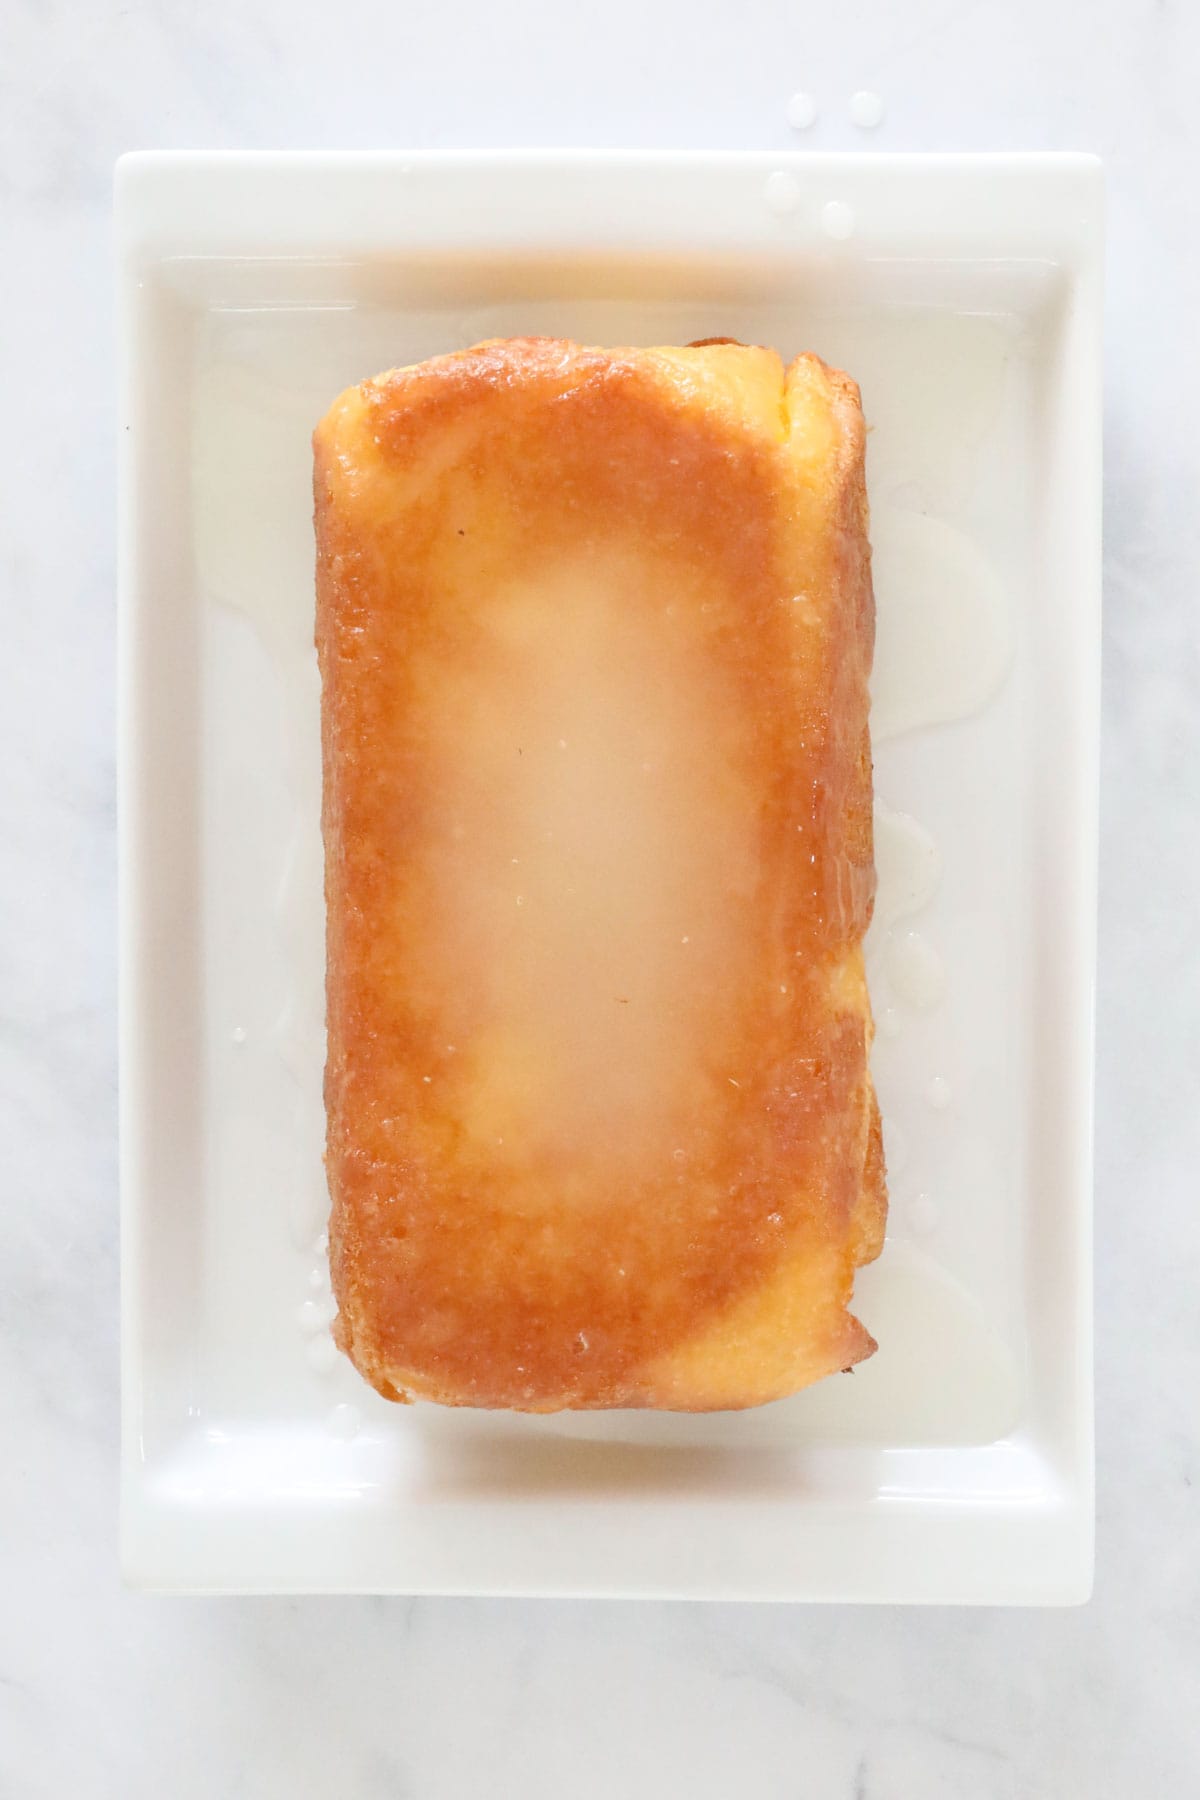 The lemon drizzle poured over the lemon loaf.